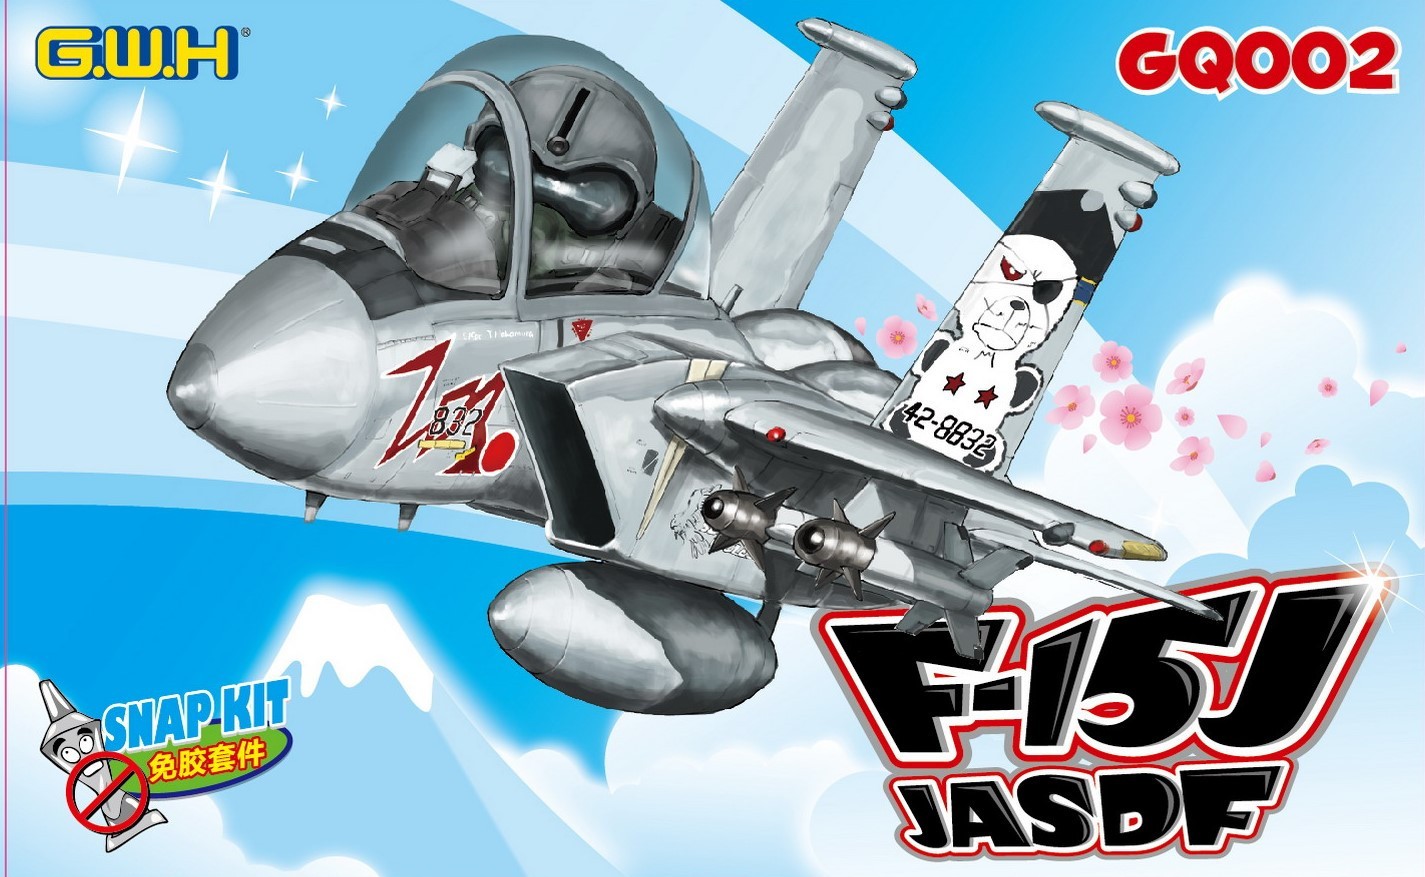 Maquette Great Wall Hobby McDonnell F-15J Eagle JASDF- - Maquette d'av